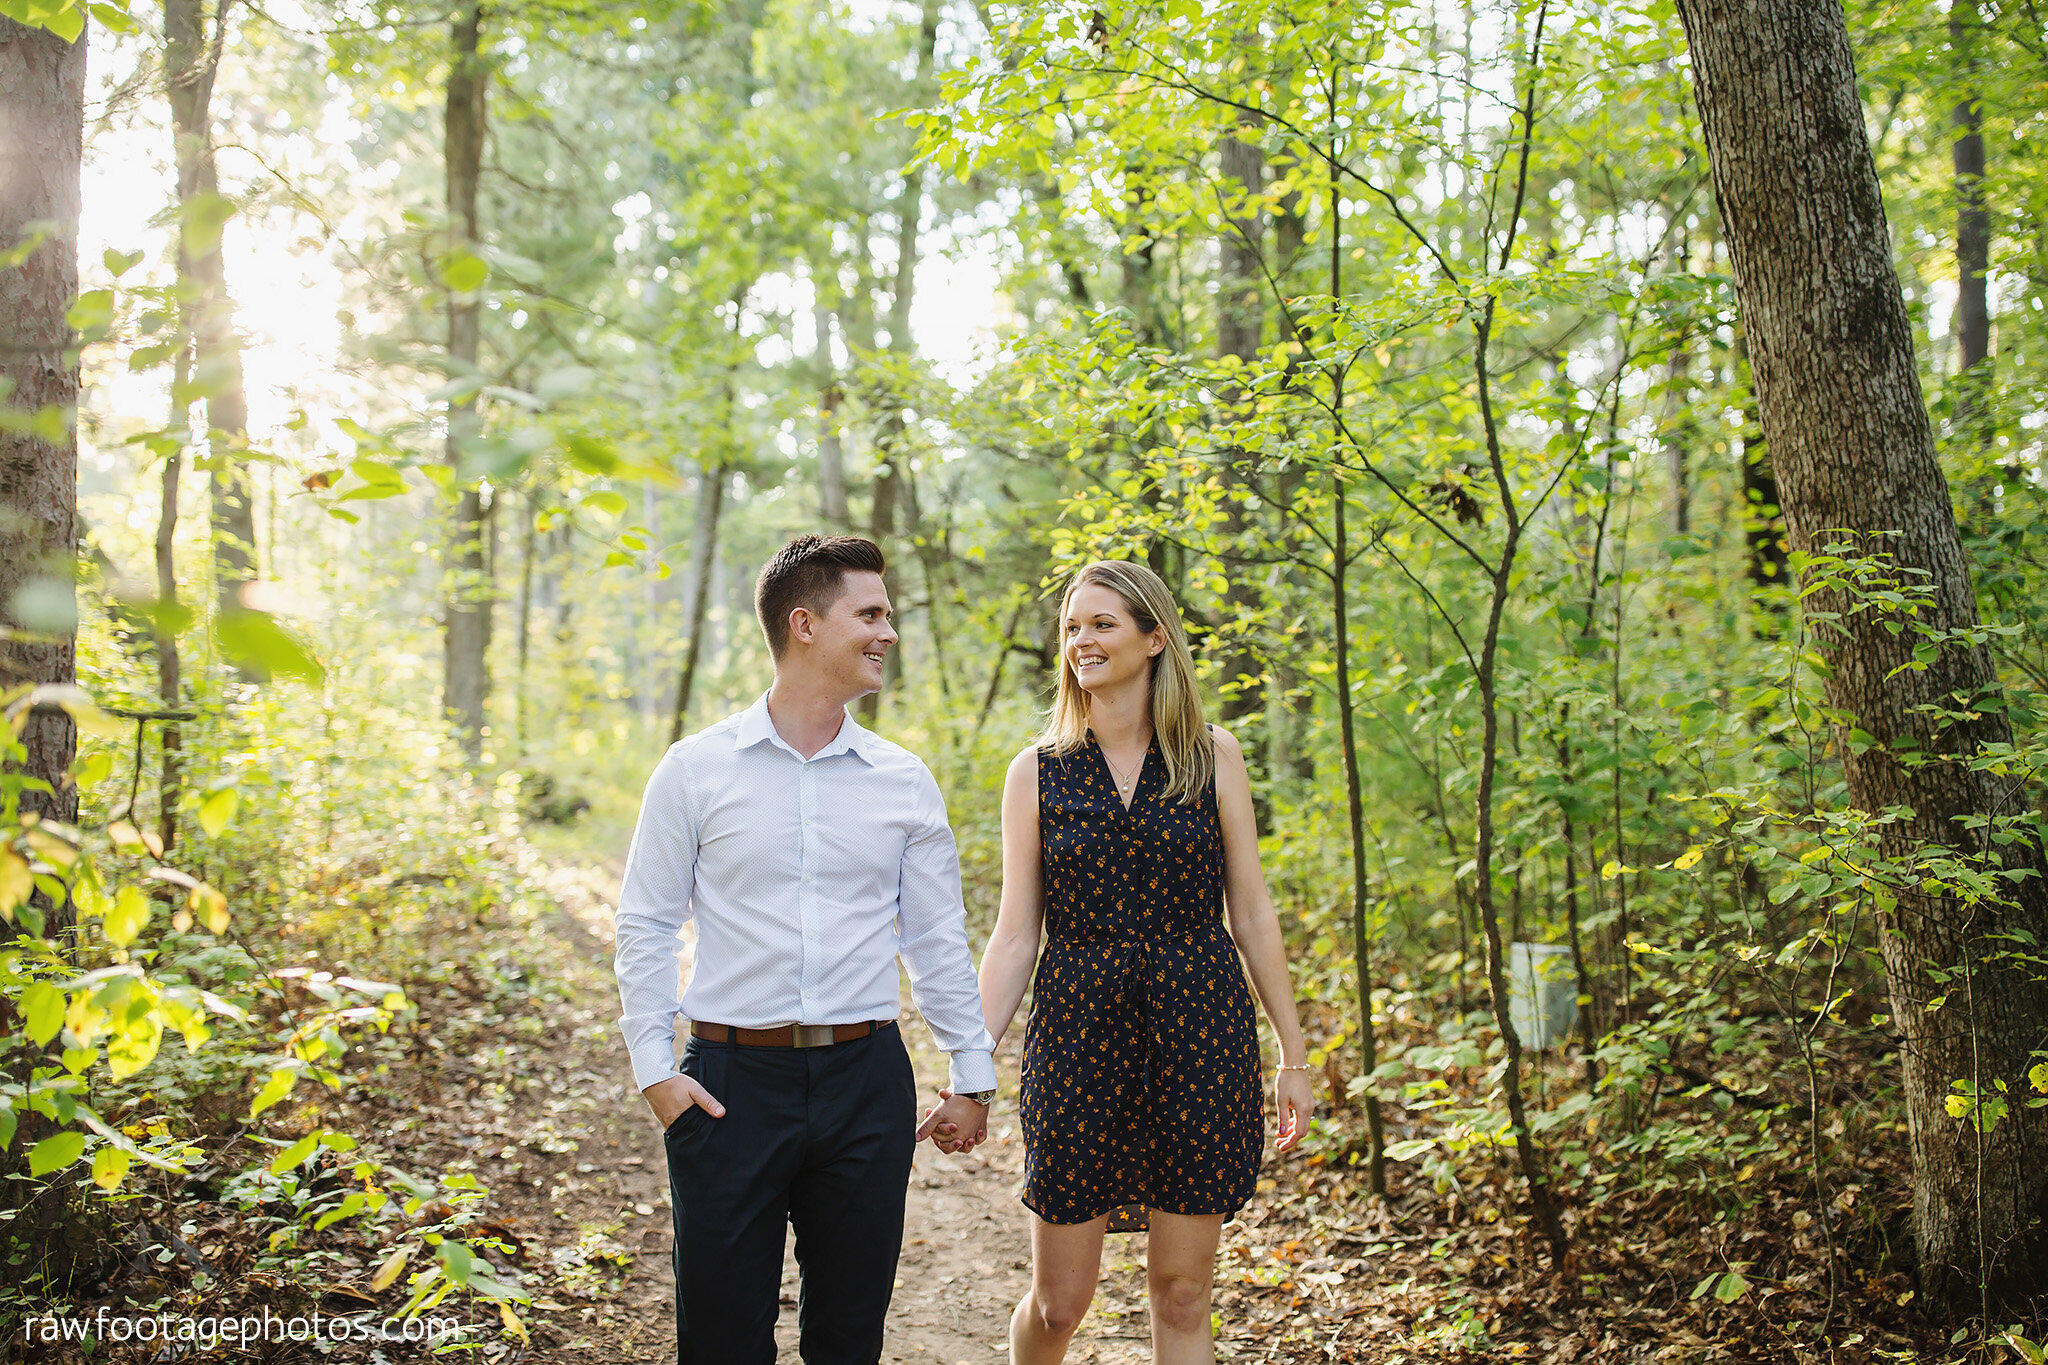 london_ontario_wedding_photographer-grand_bend_engagement_session-beach_engagement-sunset-forest-woods-raw_footage_photography006.jpg